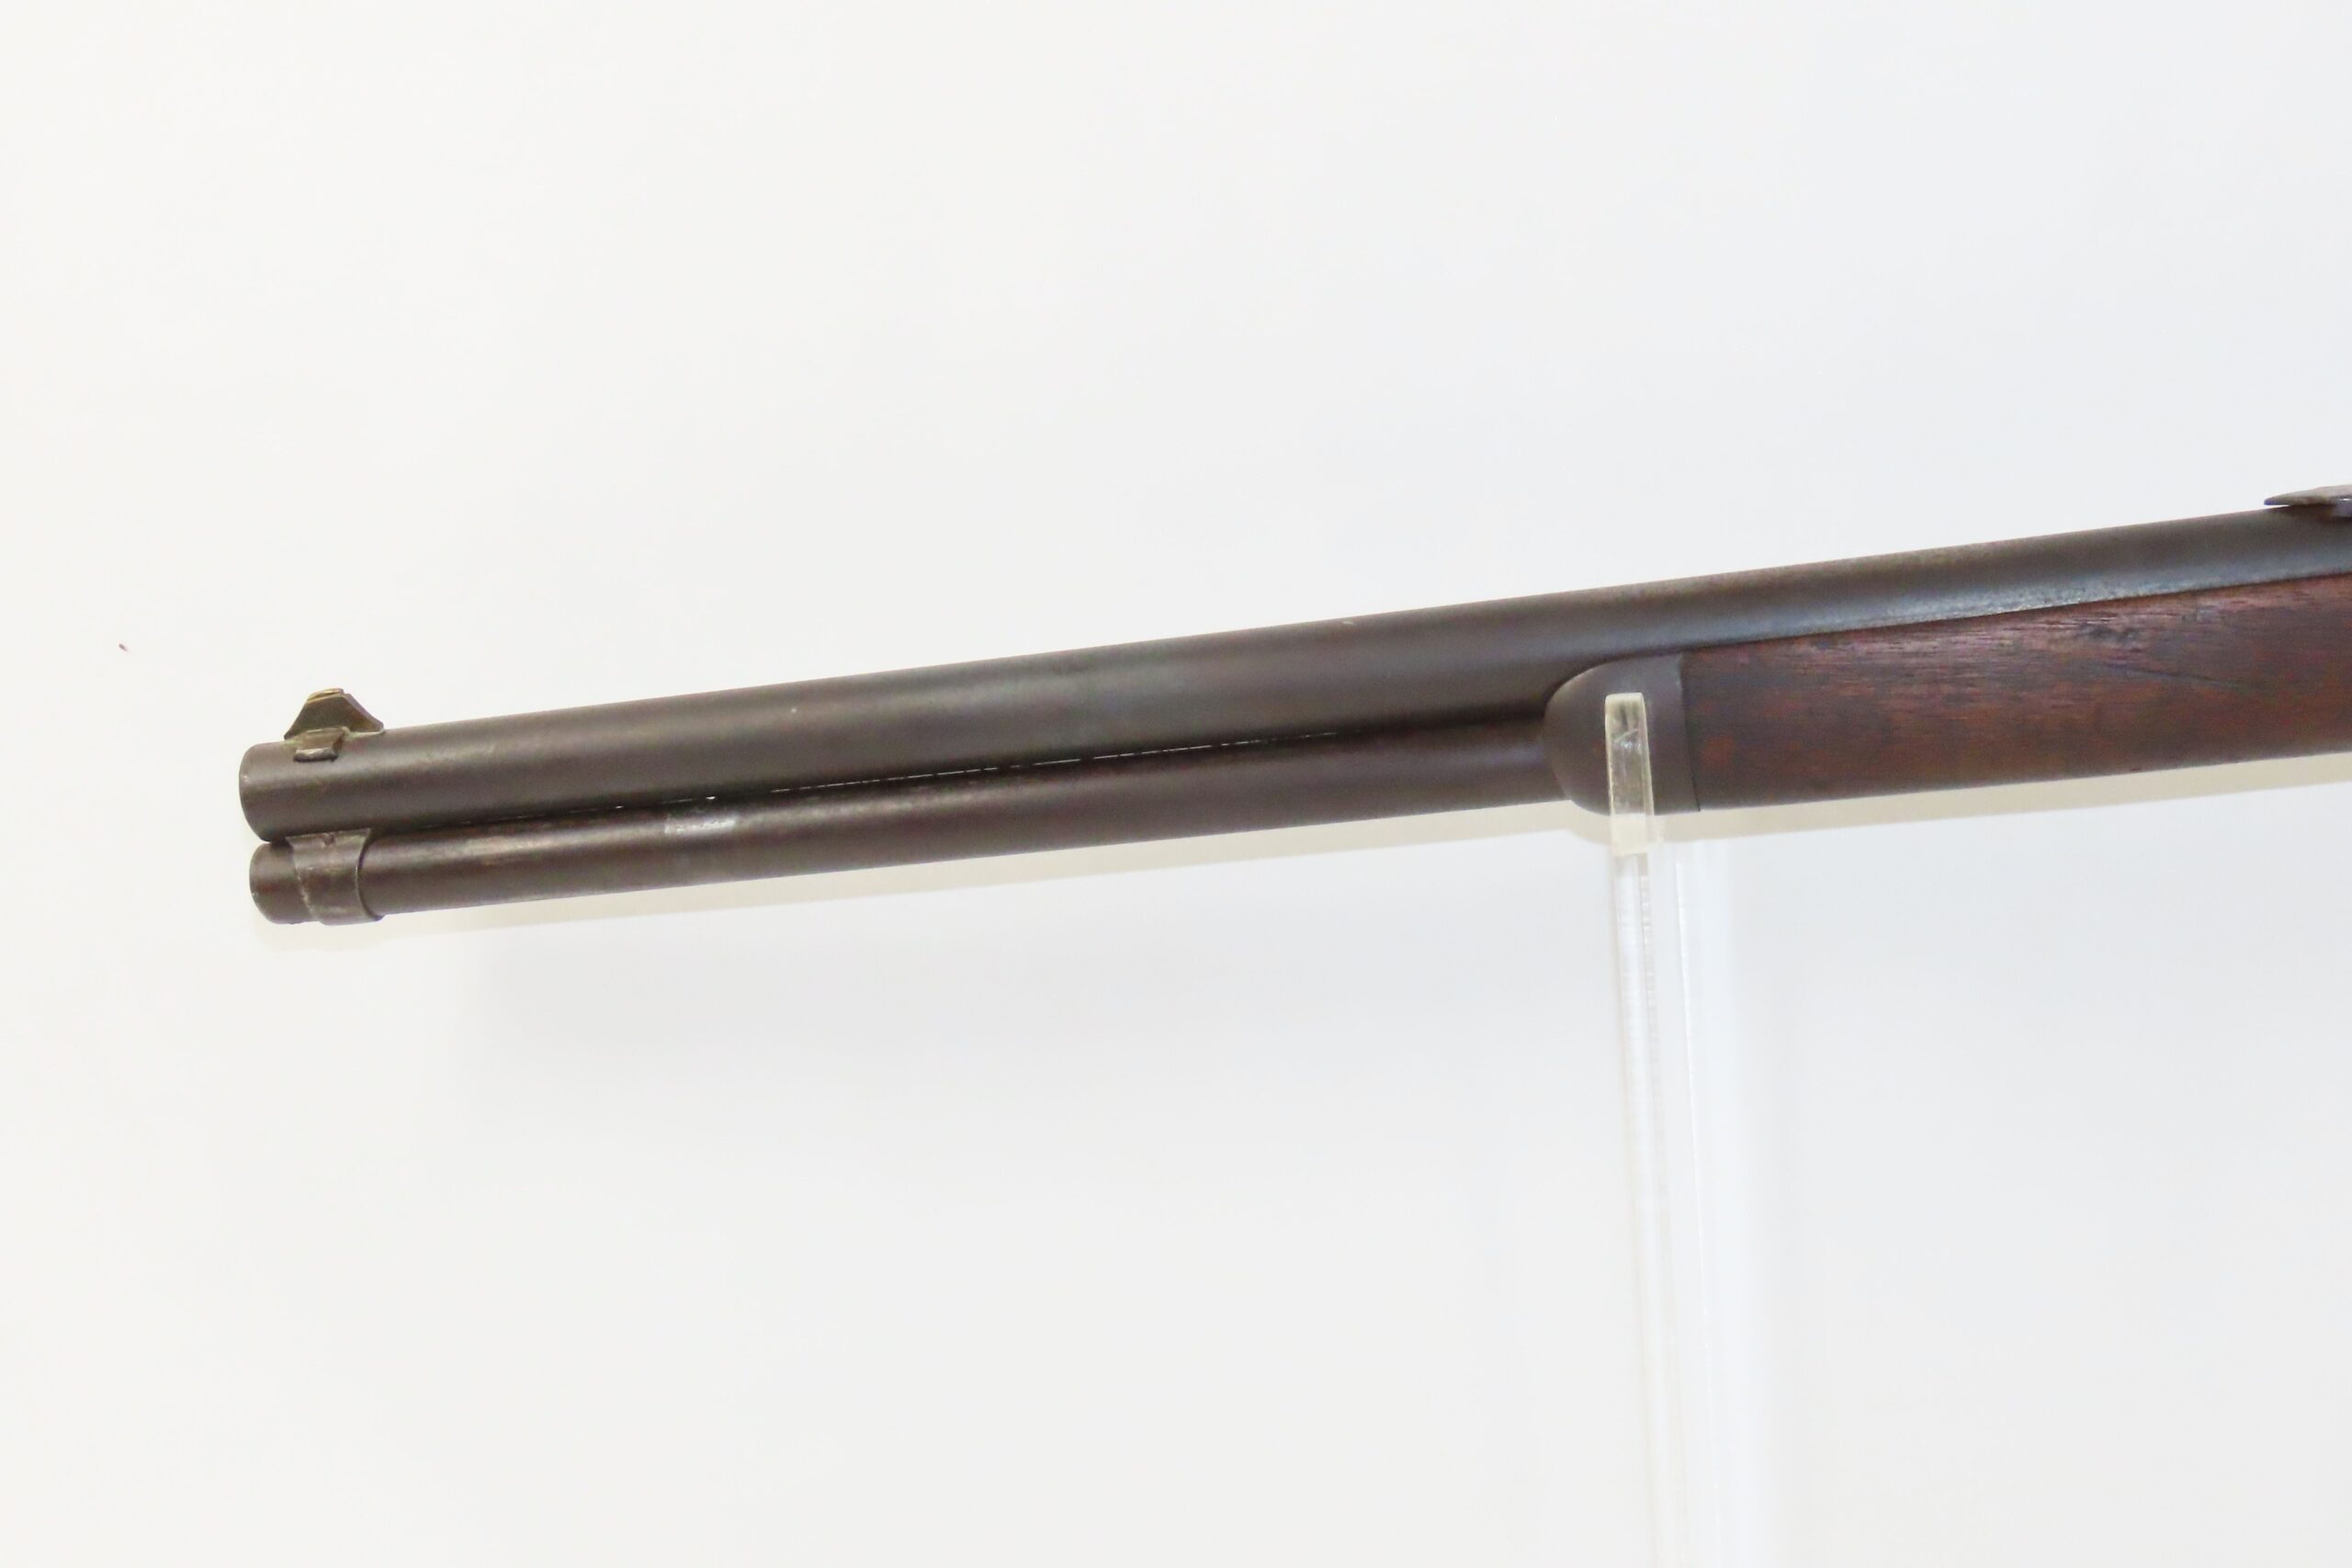 Scarce Antique .22 Cal. WINCHESTER Model 1873 Lever Action Repeating RIFLE  Less Than 20K MADE & First U.S. .22 REPEATING RIFLE